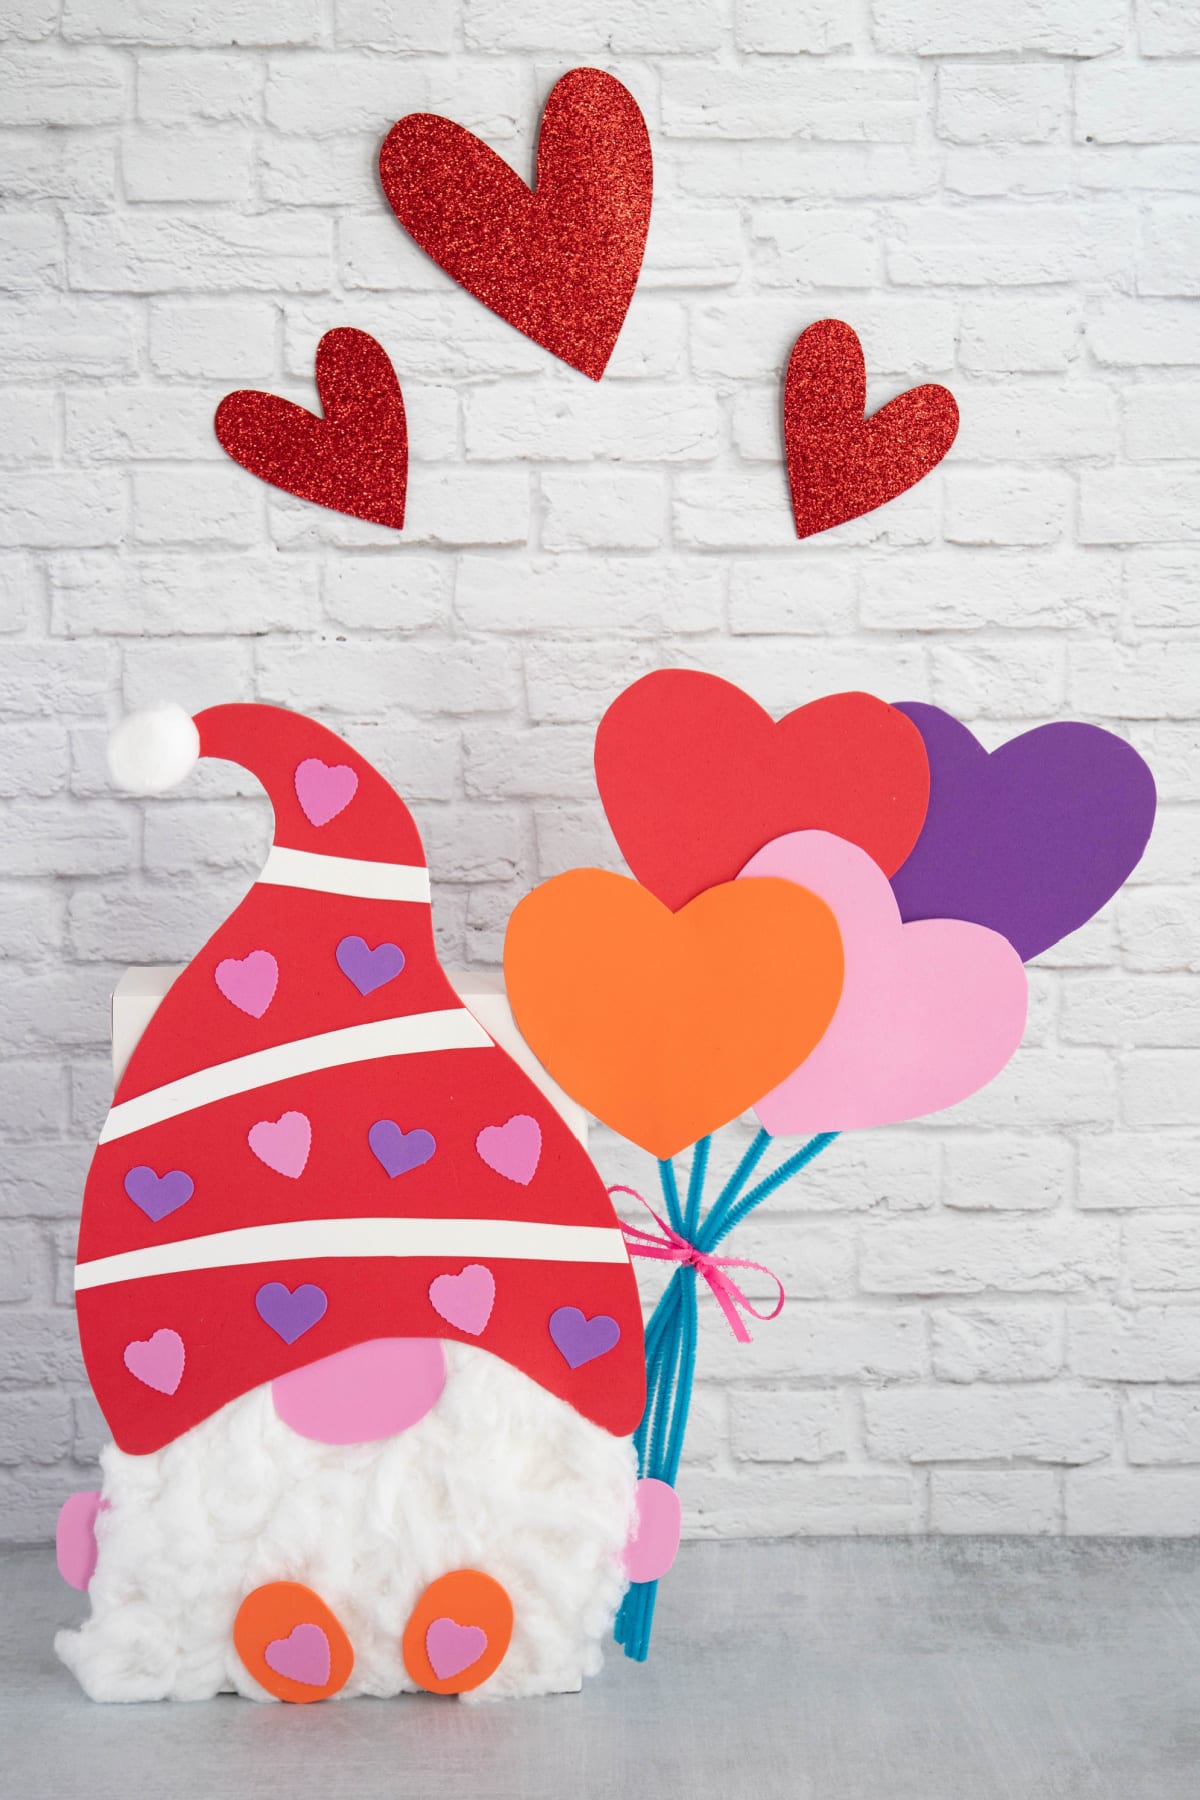 Gnome Valentine Box with balloons